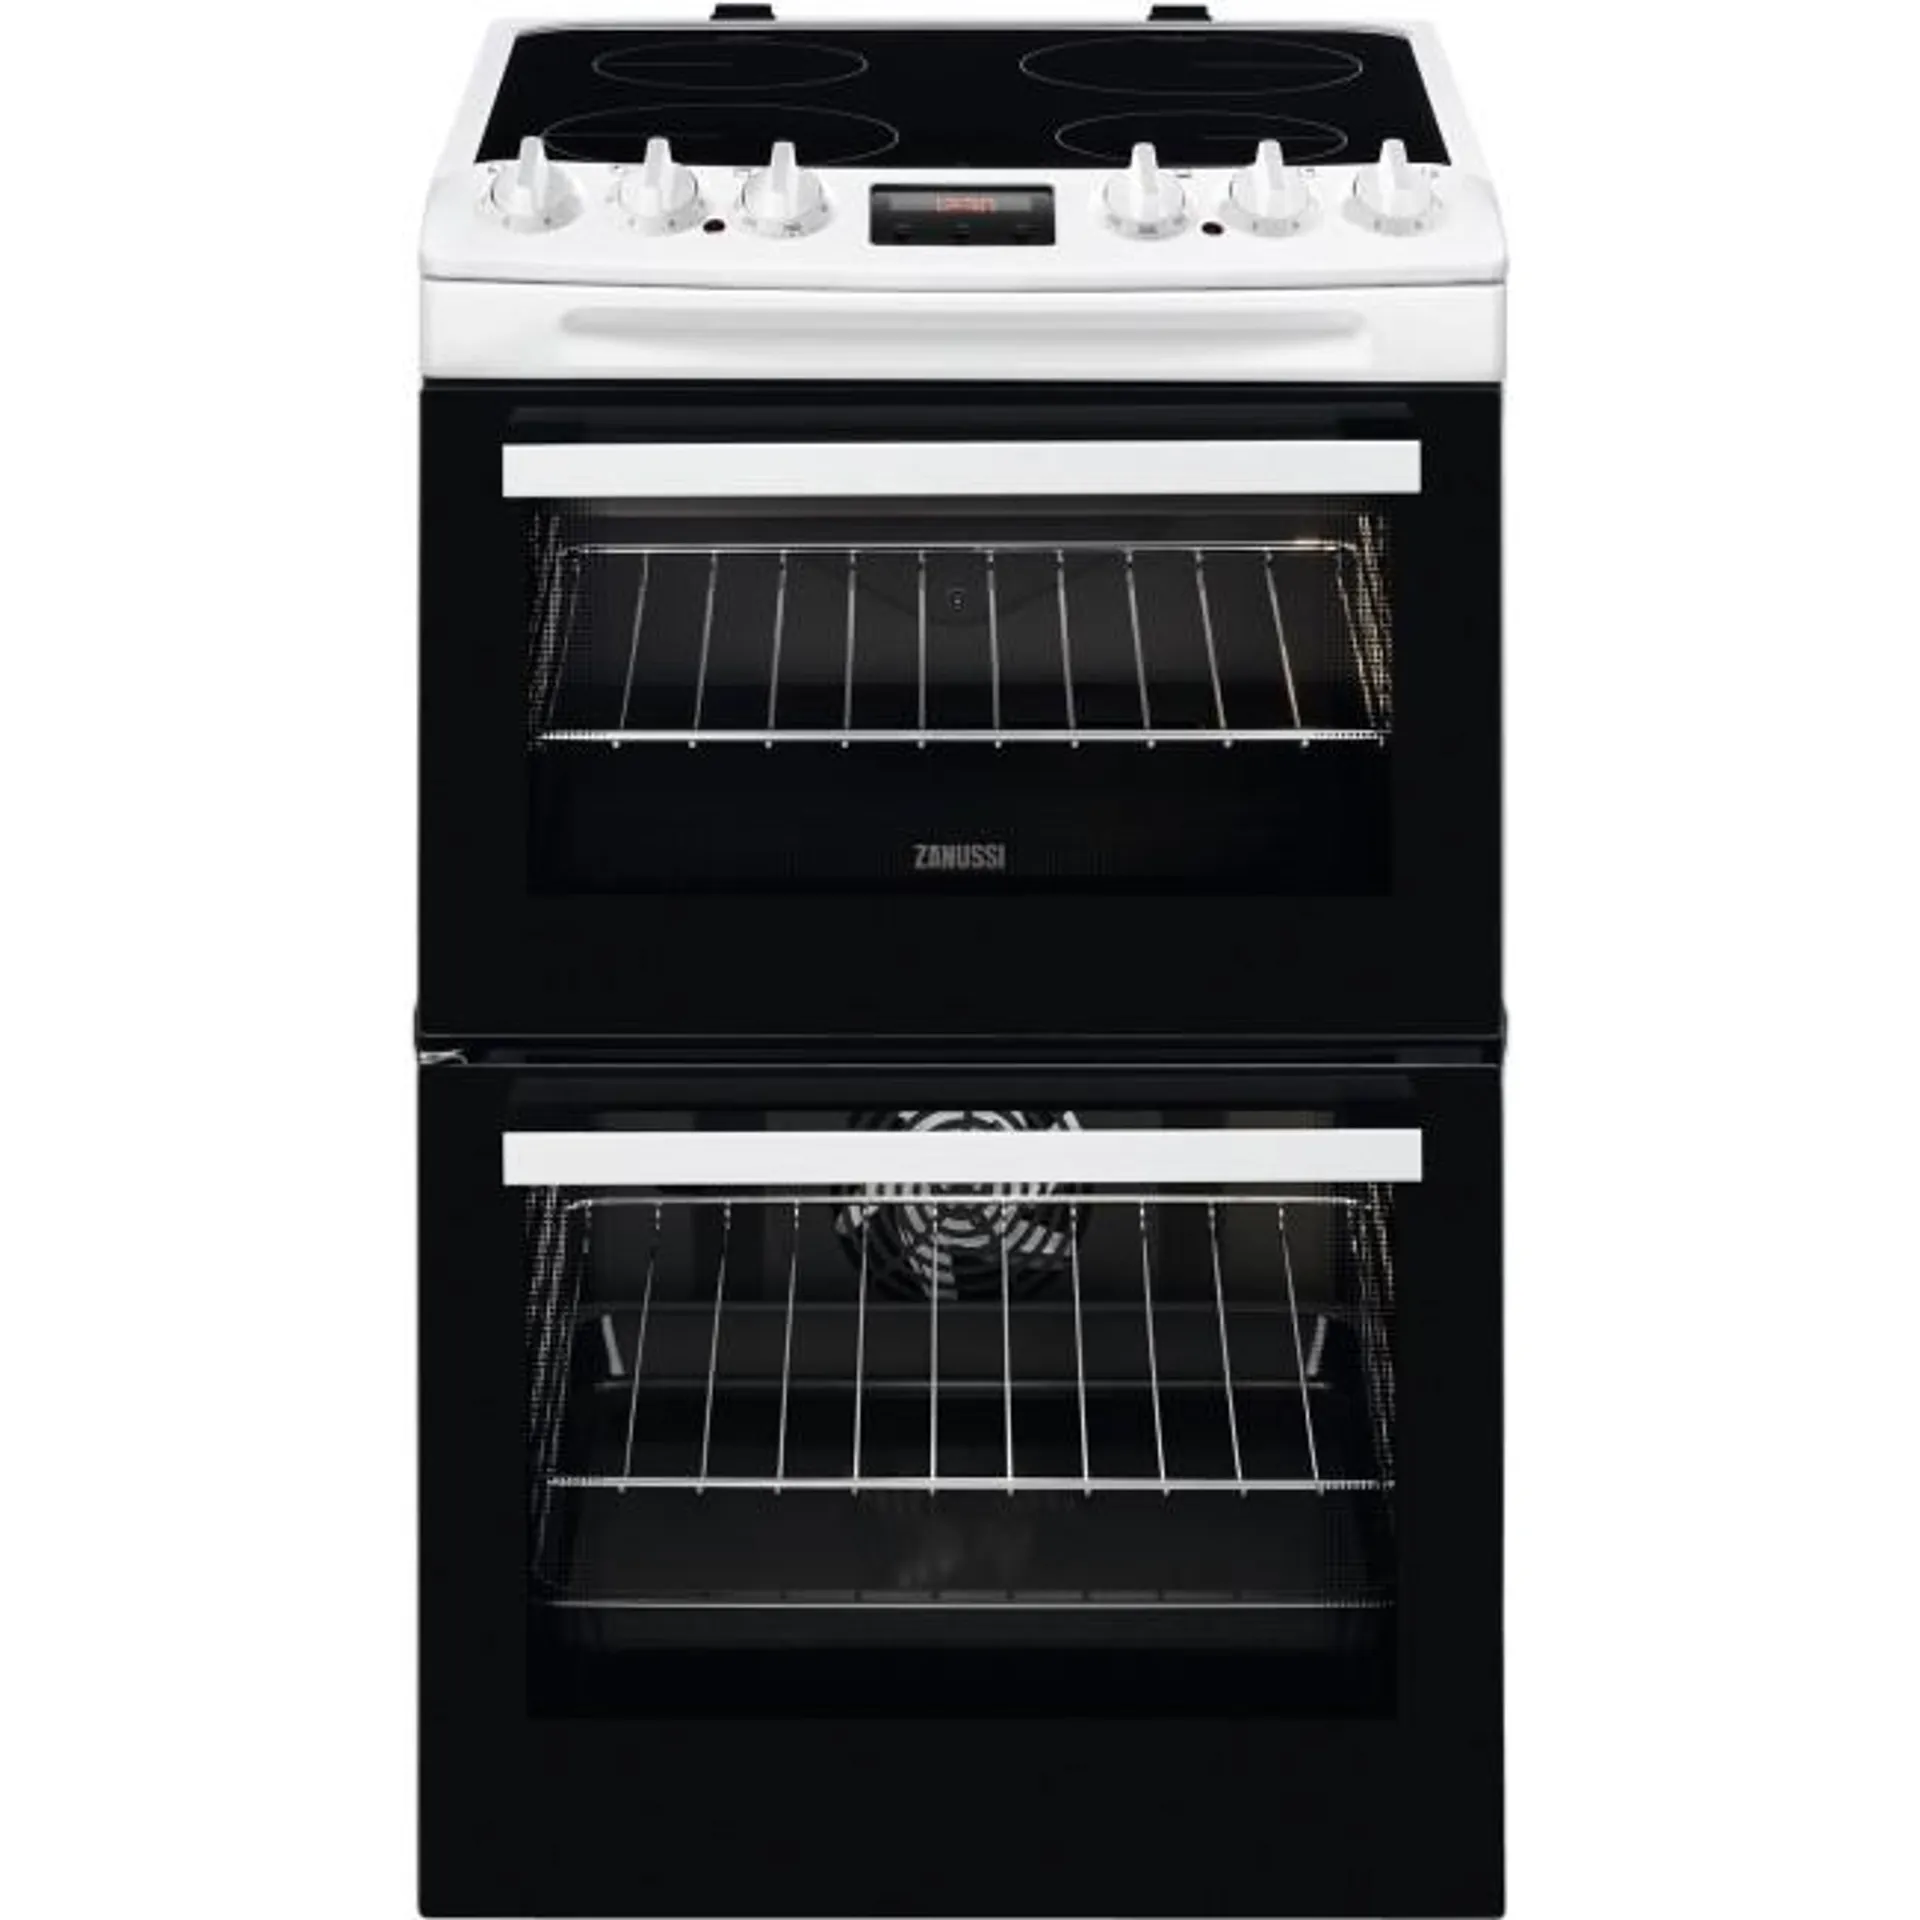 Zanussi 55cm Double Oven Electric Cooker with Catalytic Liners - White